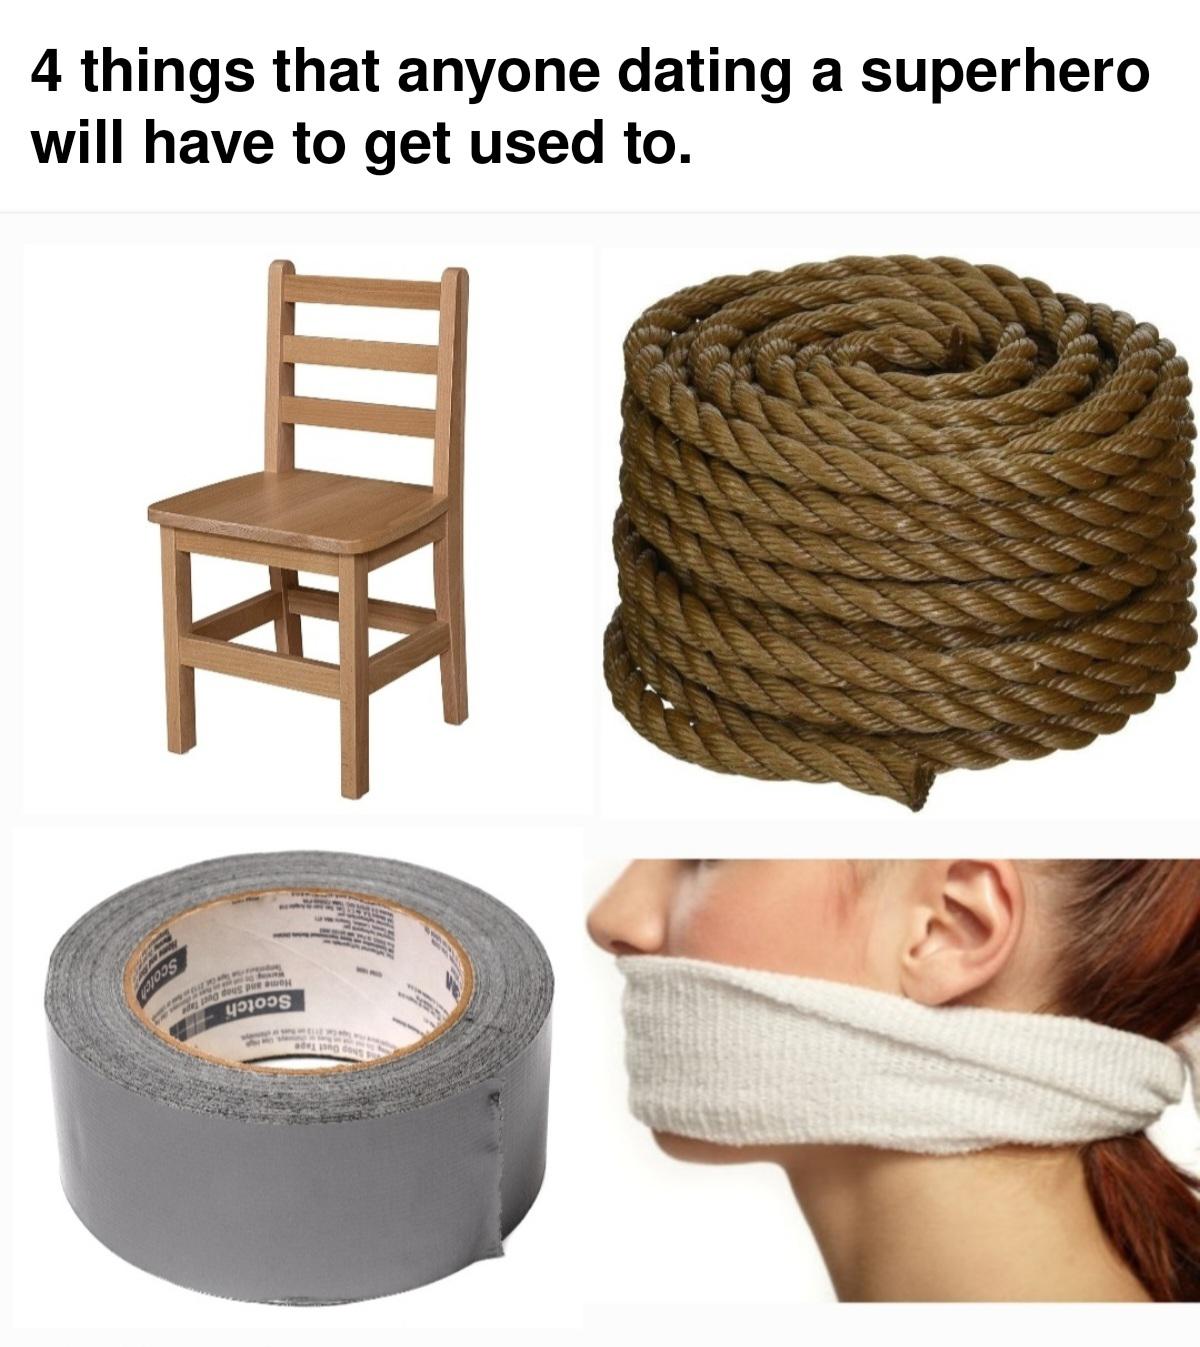 funny memes - dank memes - wooden kids chair - 4 things that anyone dating a superhero will have to get used to. Scotch rende Warning De Home and Shop Duet Tape Scotch Shop Oust Tape Stree